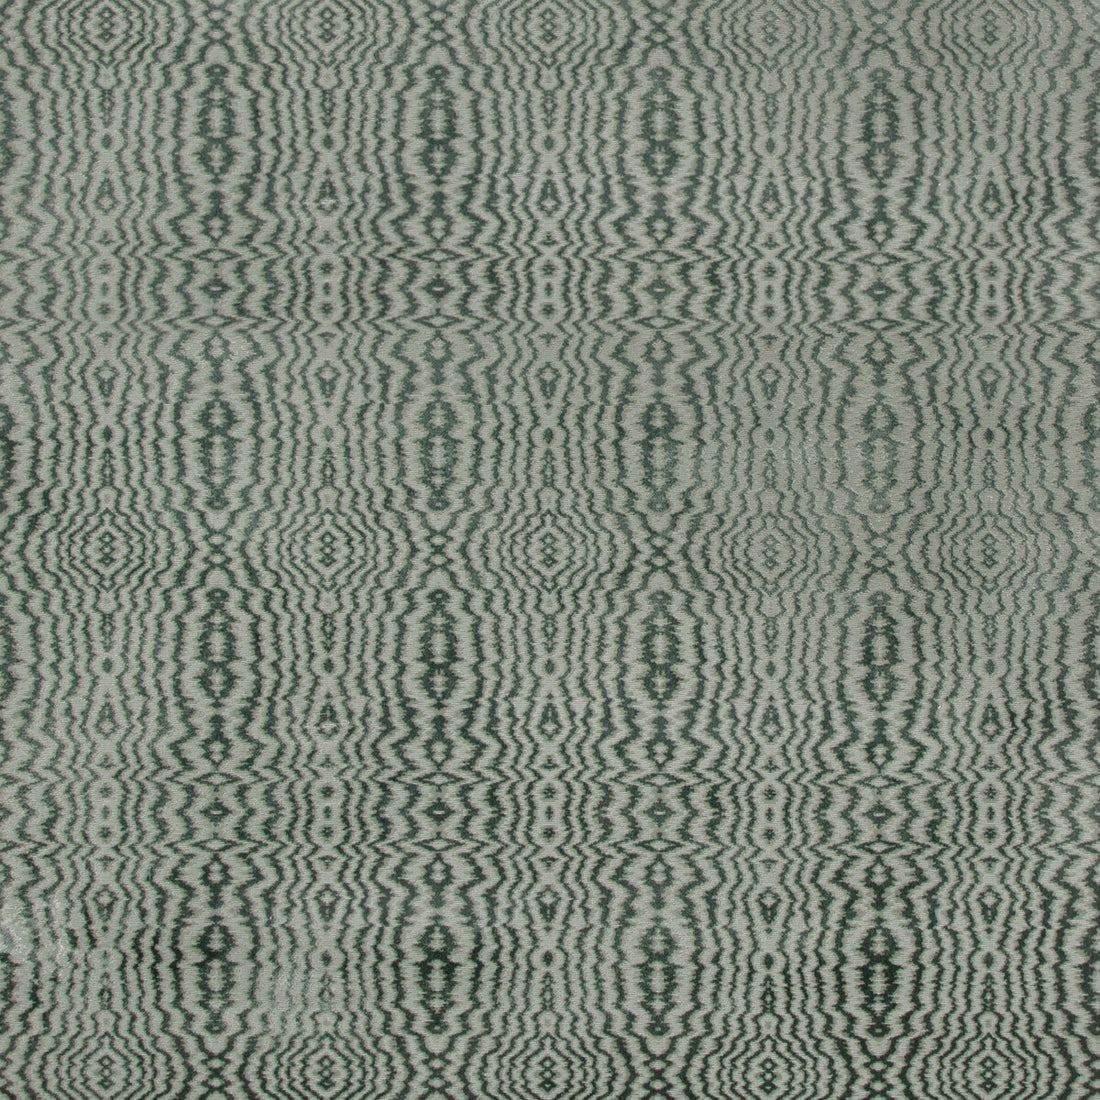 Callow Velvet fabric in aqua color - pattern 2019119.135.0 - by Lee Jofa in the Harlington Velvets collection